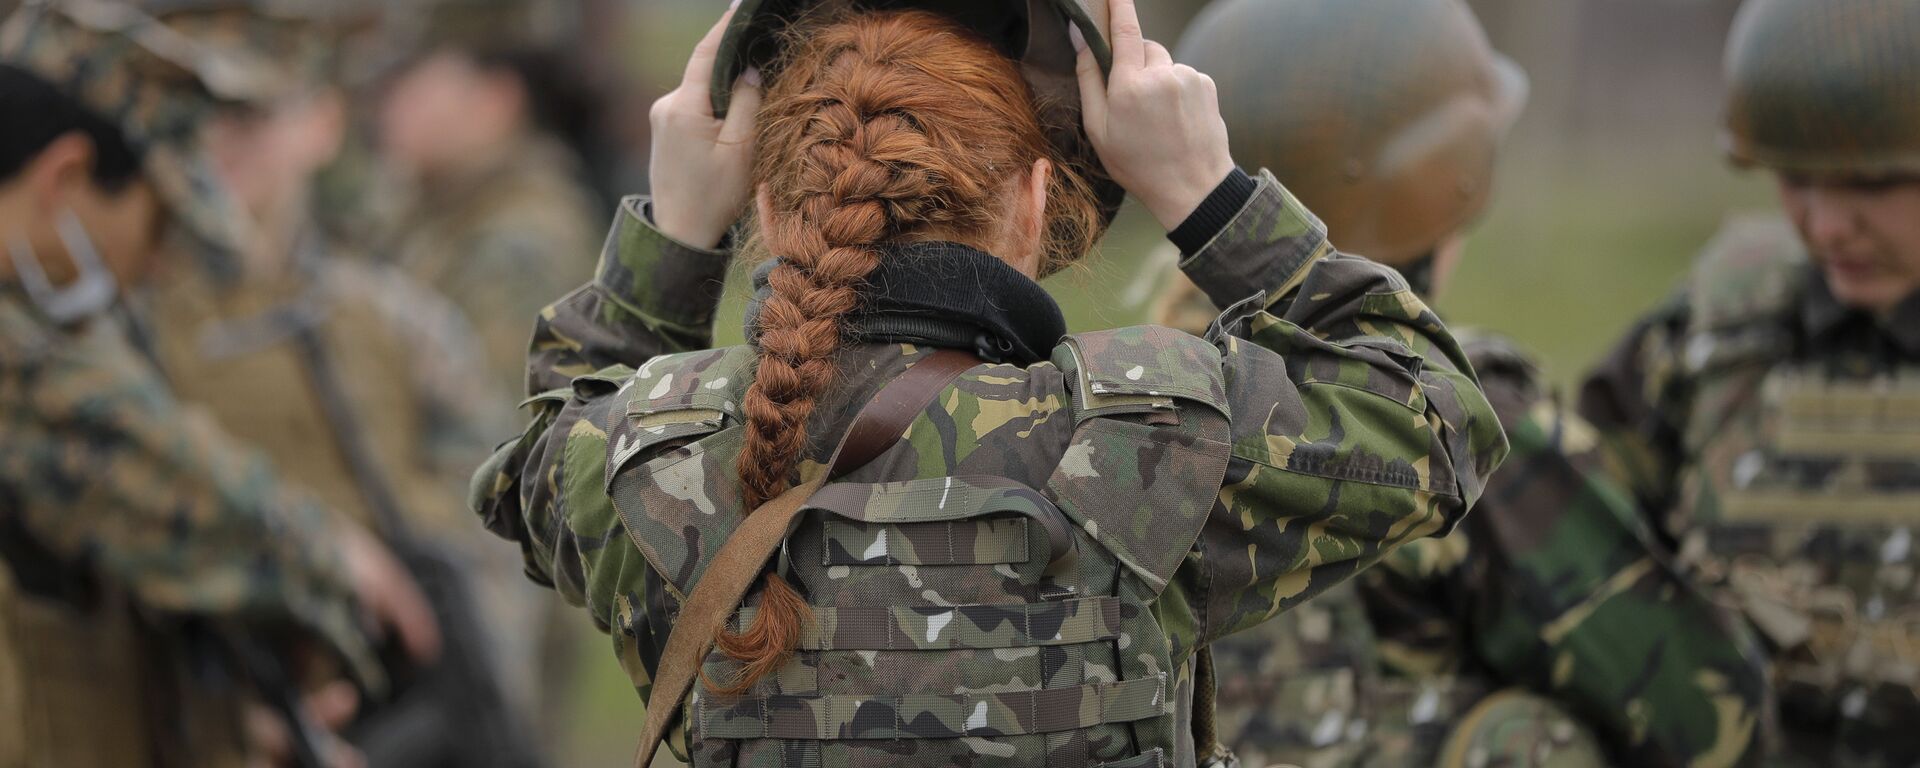 A Romanian female soldier adjusts her helmet before taking part in weapons training with US Marines female counterparts at the Capu Midia Surface to Air Firing Range, on the Black Sea coast in Romania, Monday, March 20, 2017 - Sputnik International, 1920, 25.07.2021